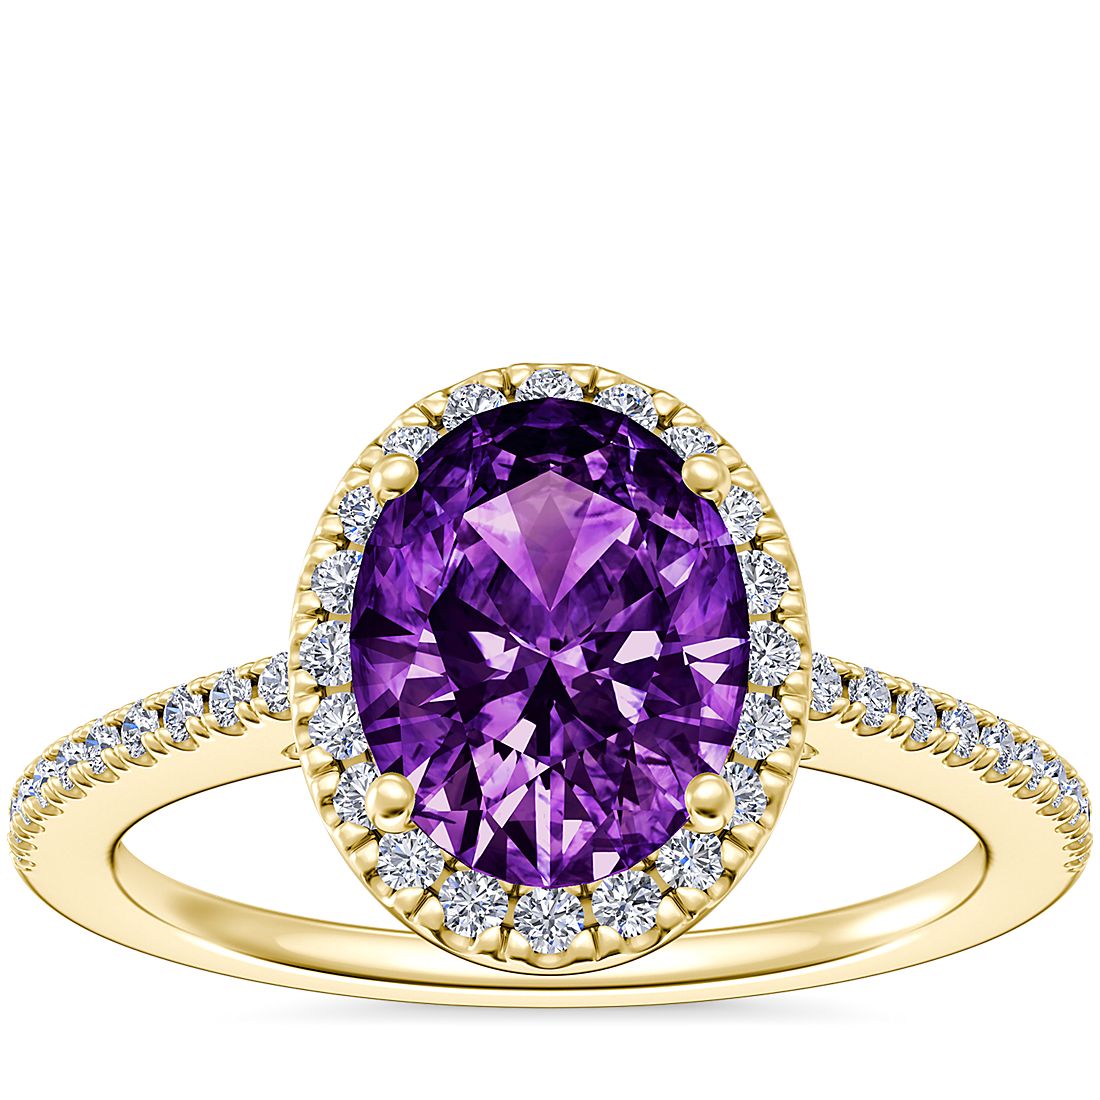 Classic Halo Diamond Engagement Ring with Oval Amethyst in 14k Yellow Gold (9x7mm)